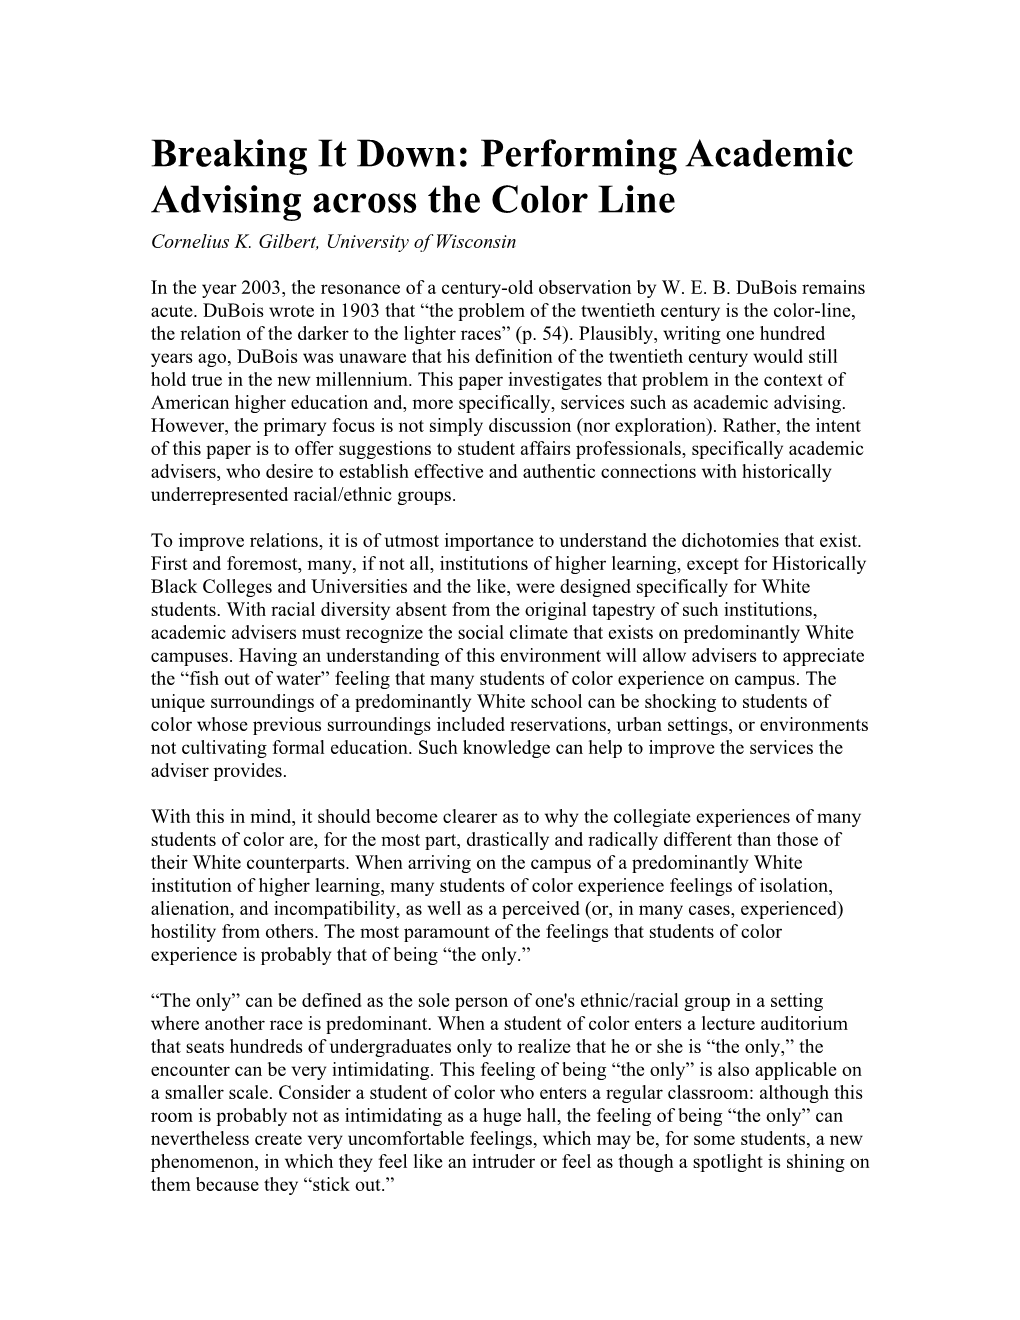 Breaking It Down: Performing Academic Advising Across the Color Line